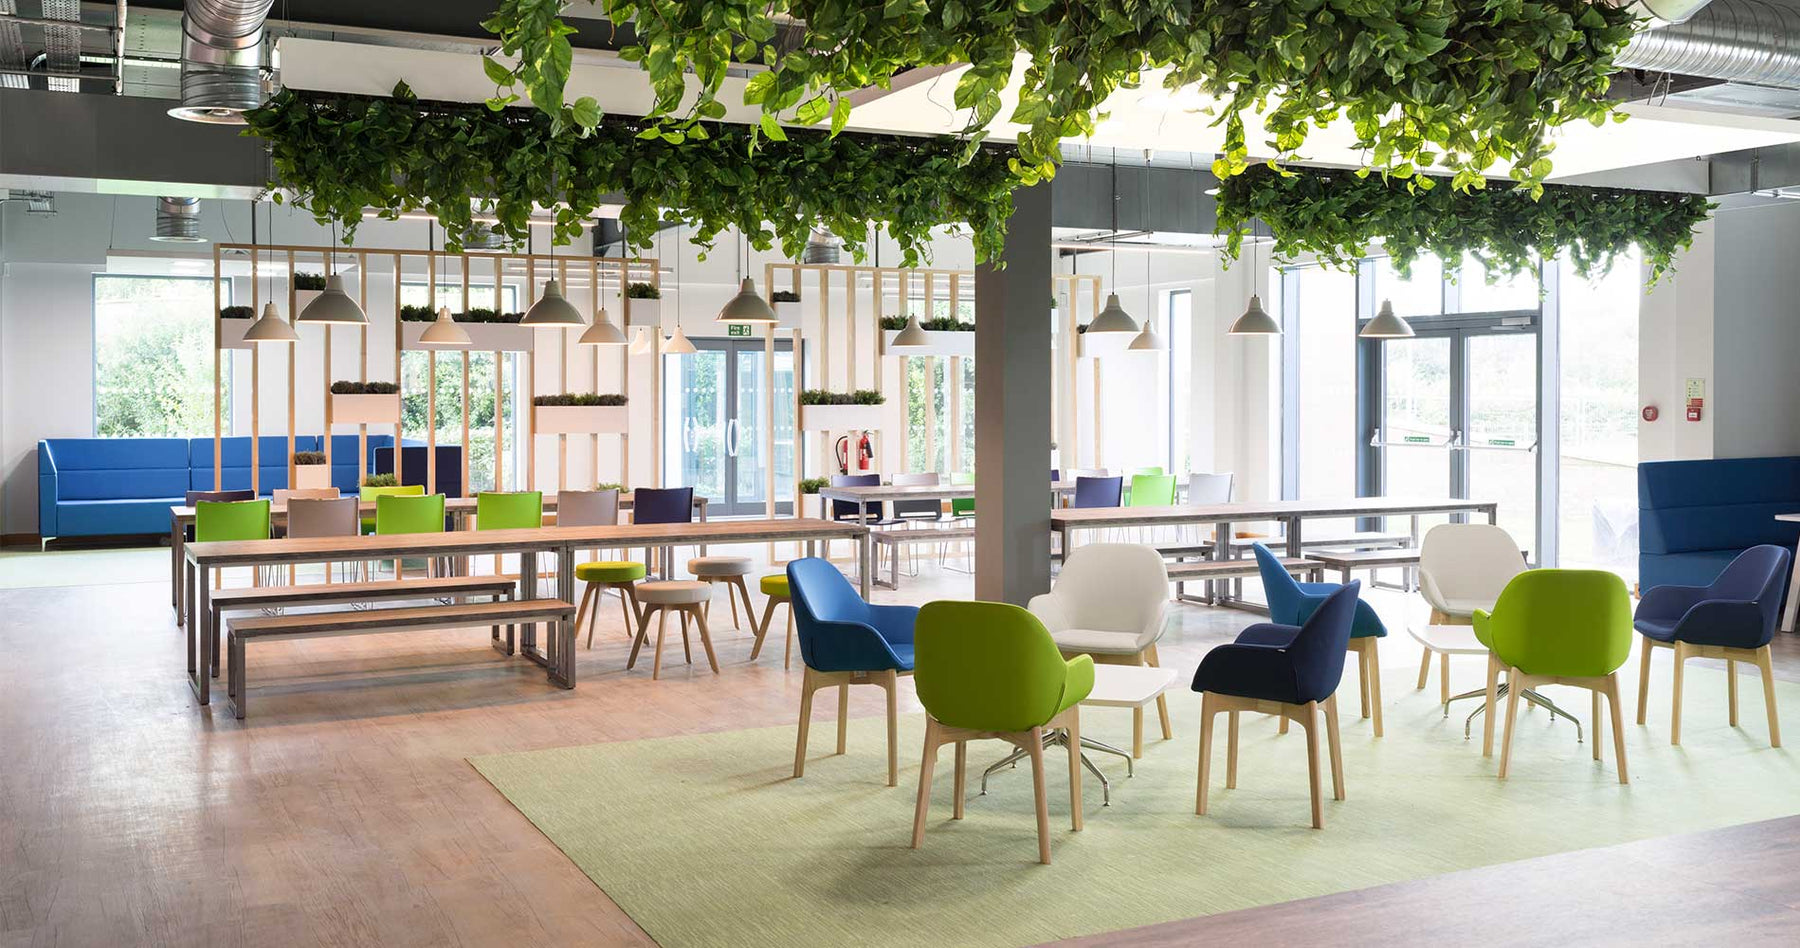 Plantscaping (1/4) - How top co-working spaces are modernizing the workplace - Nurserylive